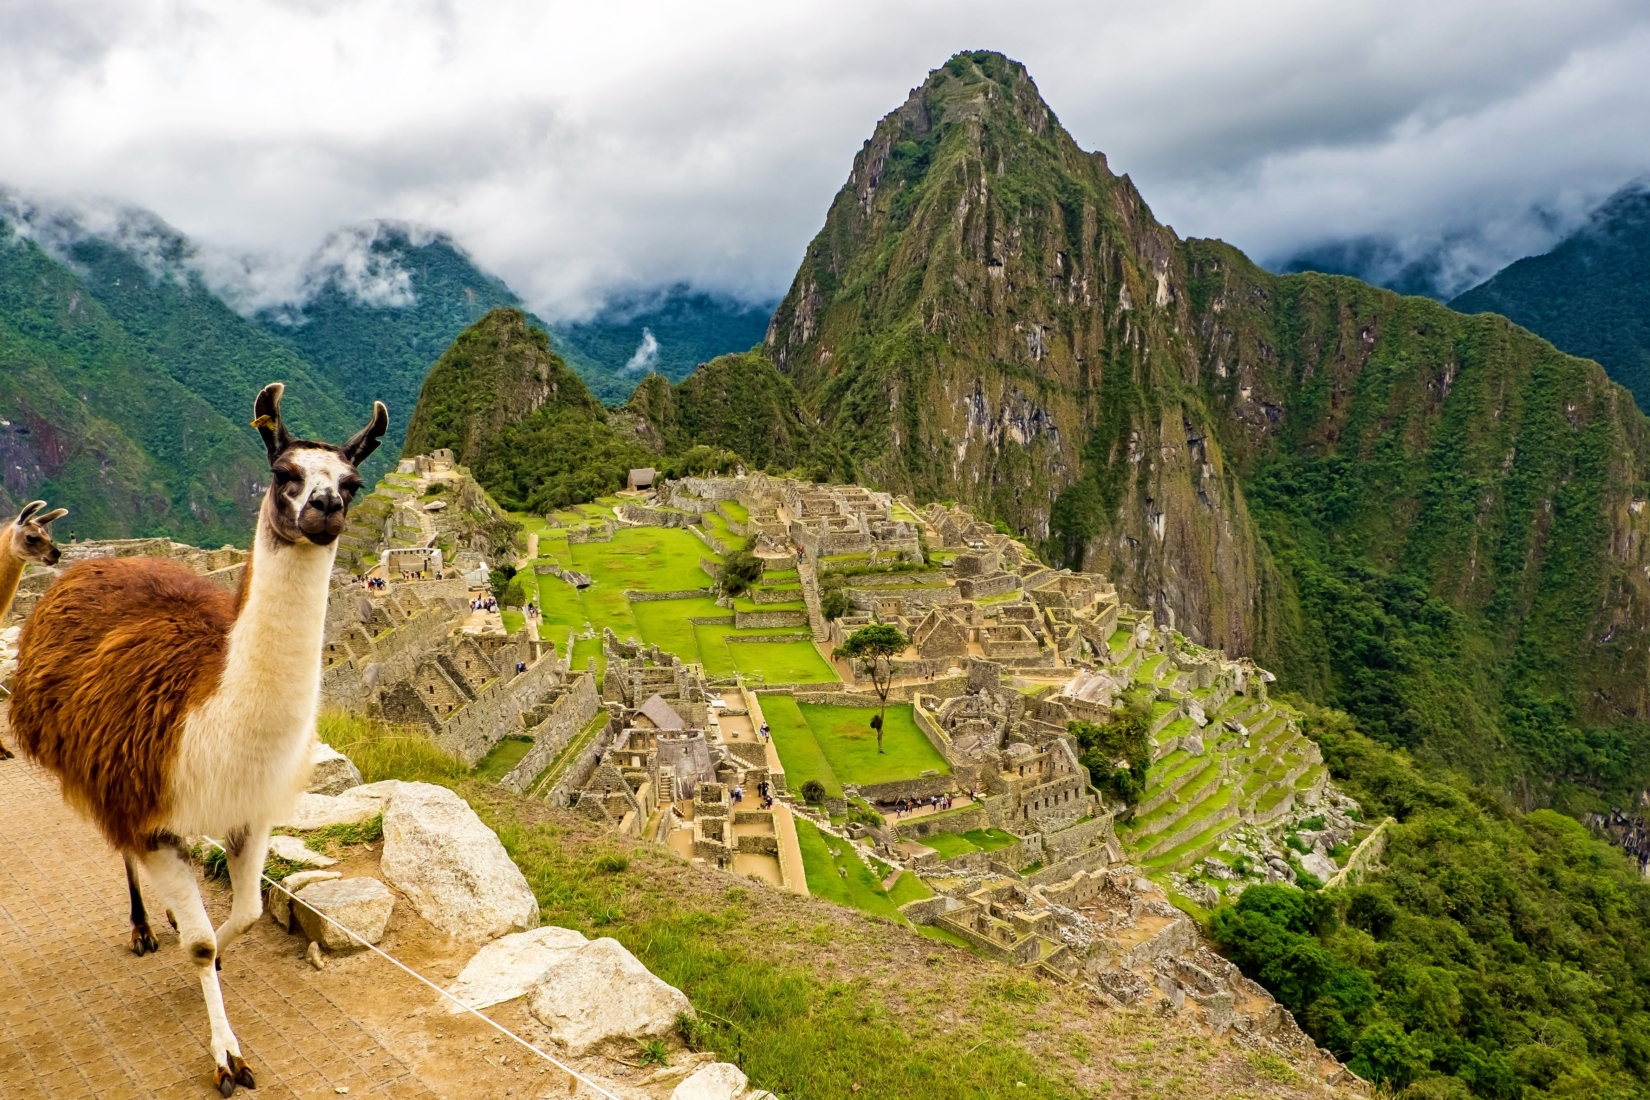 A llama walking in front of the green mountains of Machu Picchu in Peru on a cloudy day